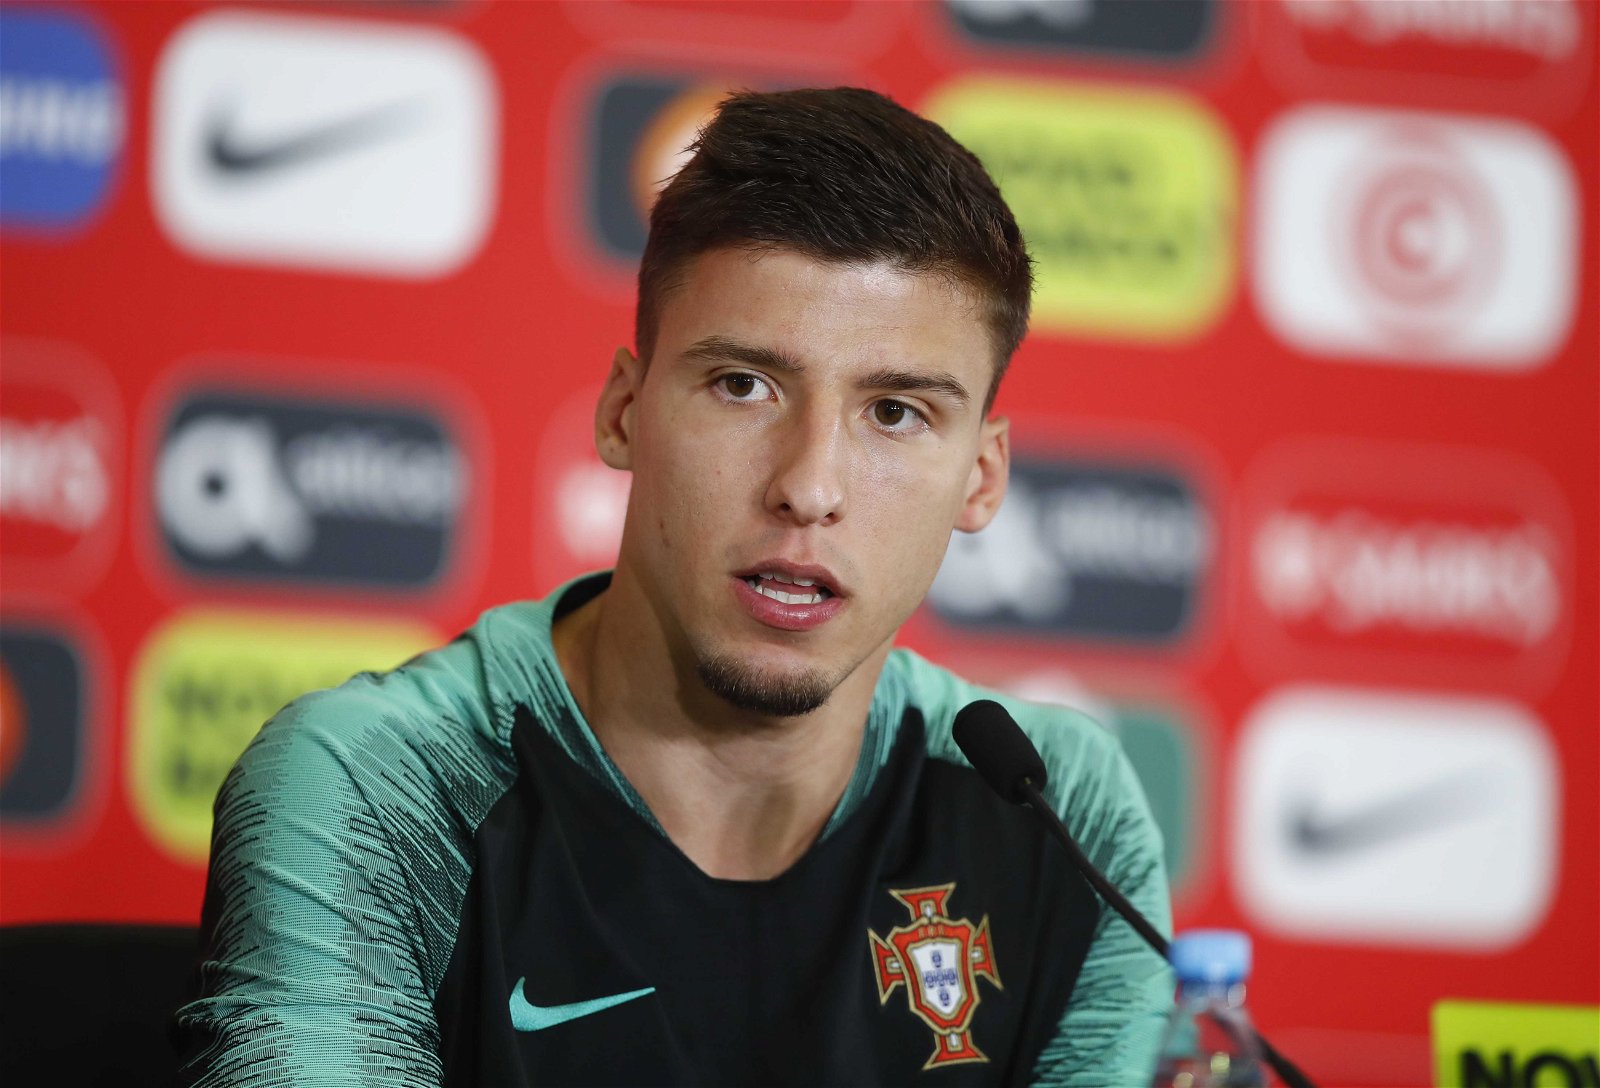 Benfica talent Ruben Dias signs new contract with improved release clause